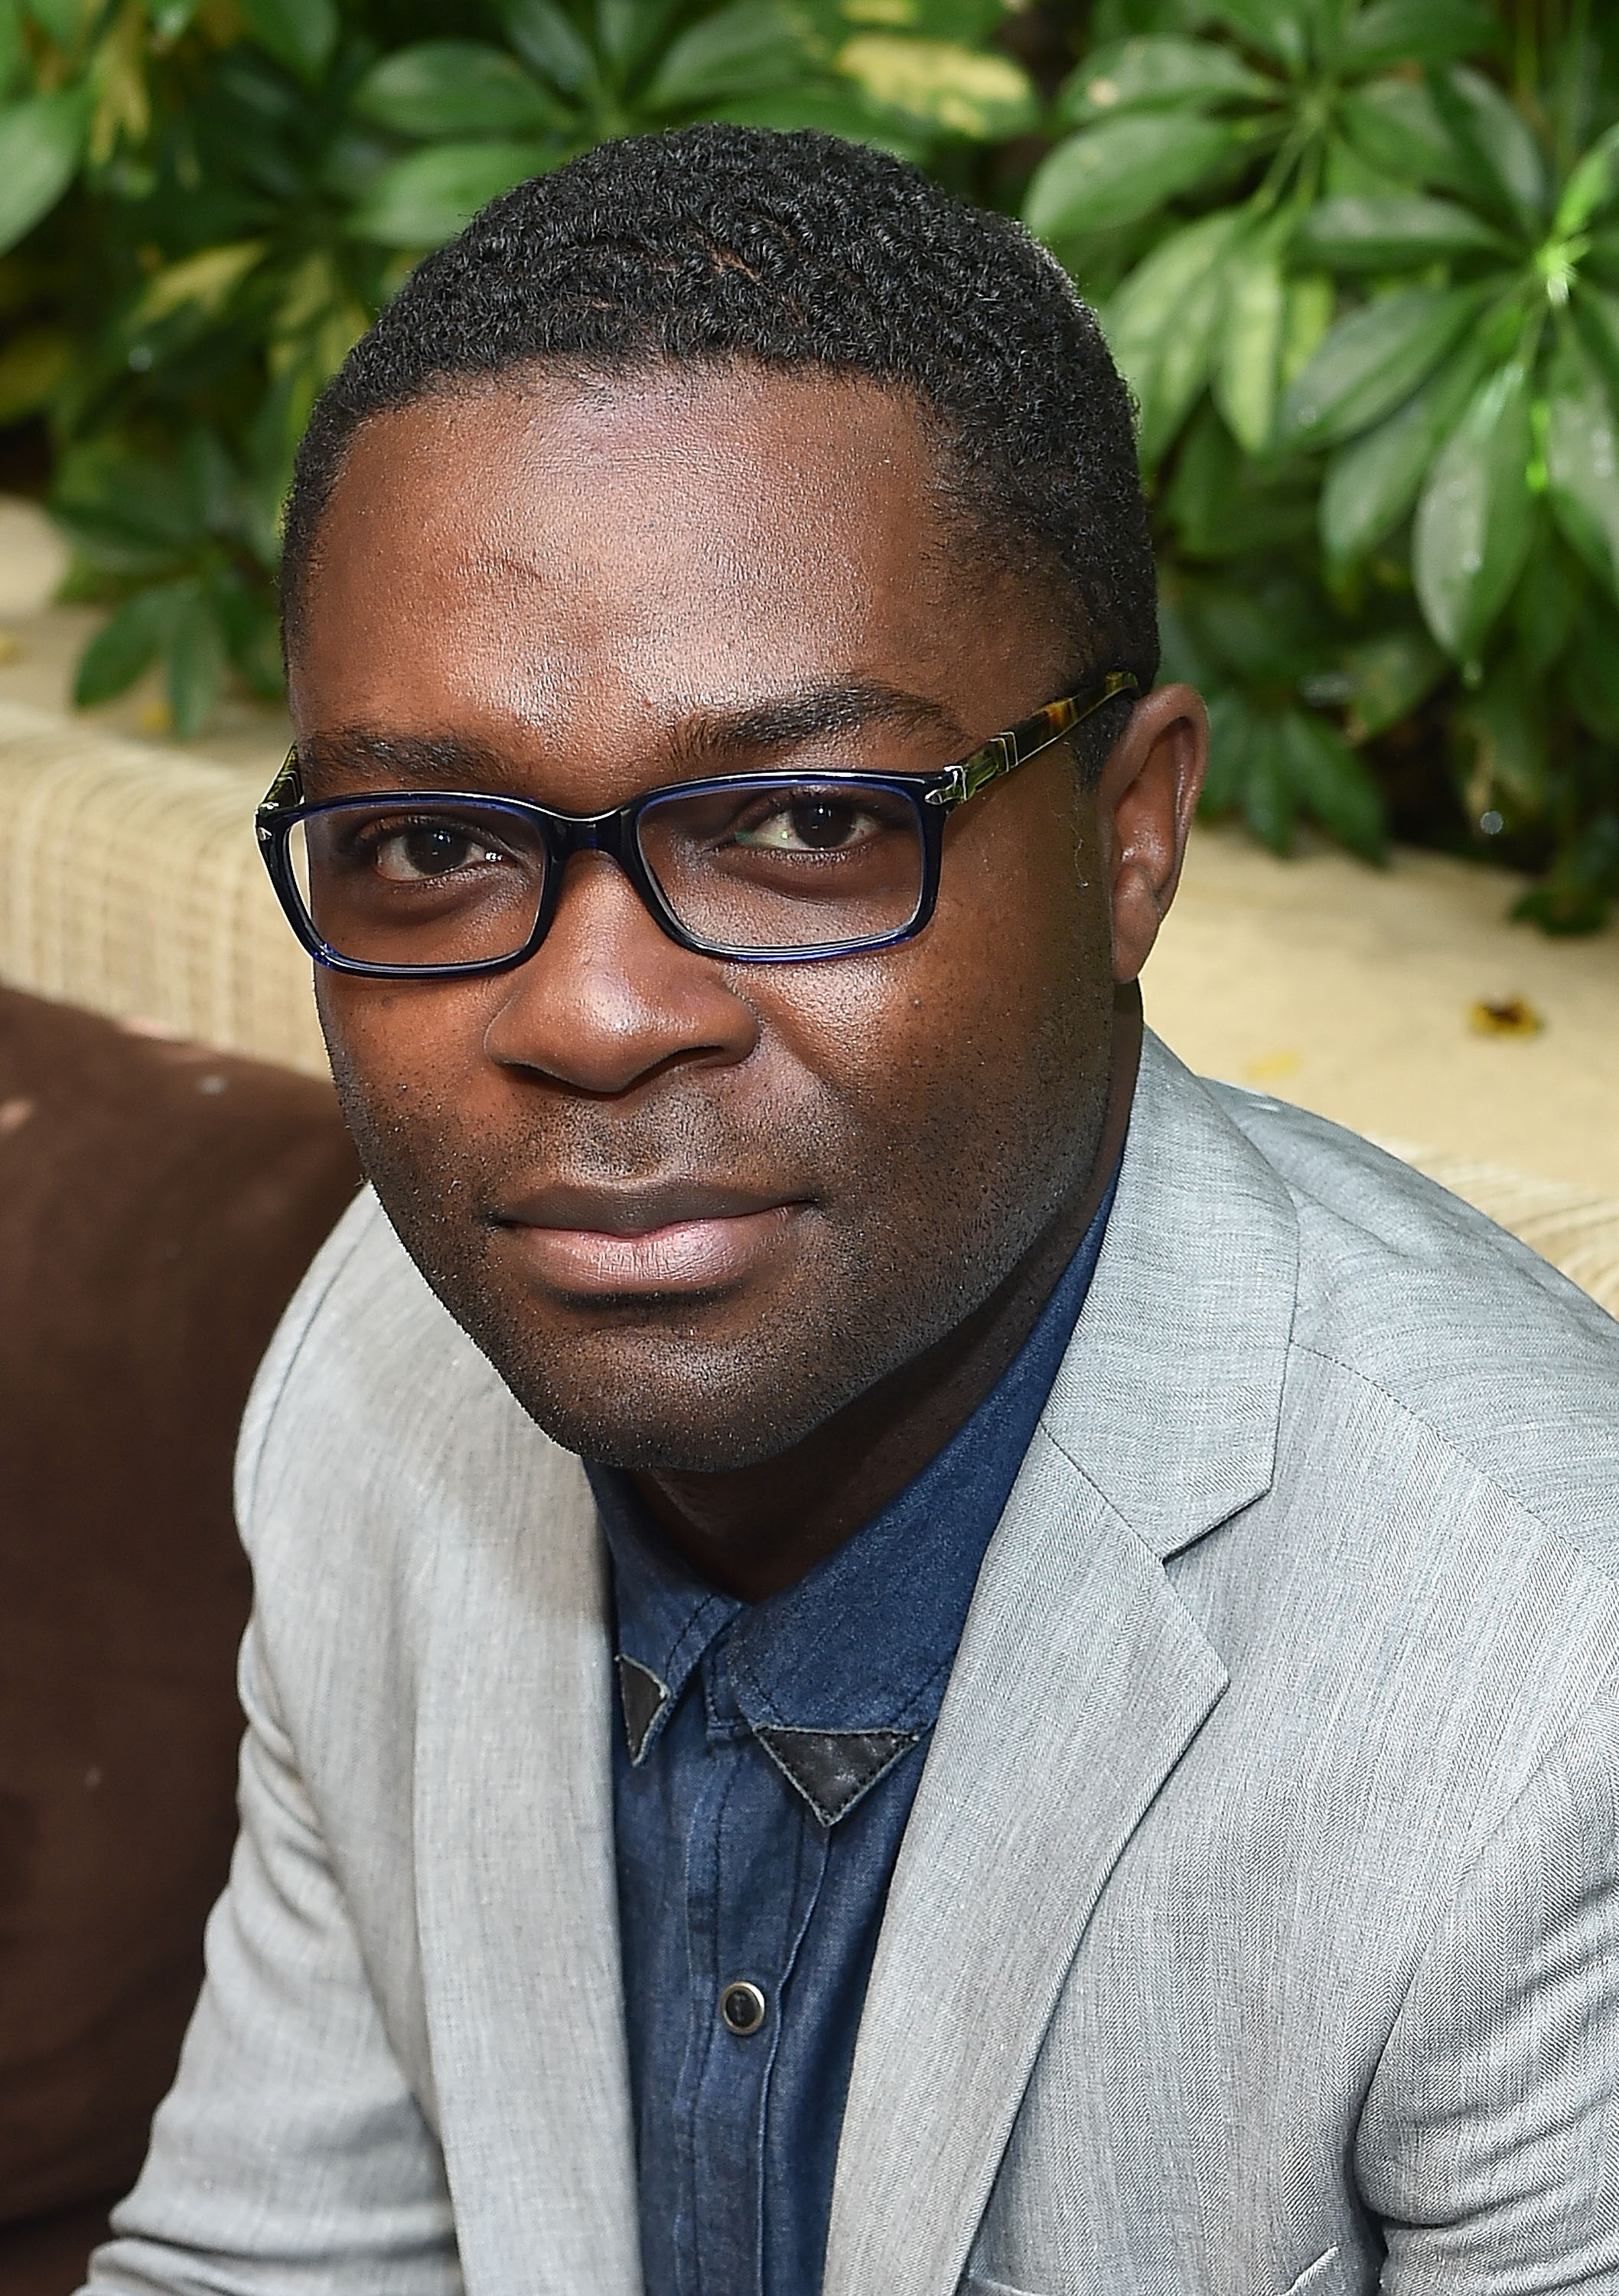 David Oyelowo attends the Variety Purpose Summit in Los Angeles, Calif. on June 25, 2015. (Paras Griffin--FilmMagic)